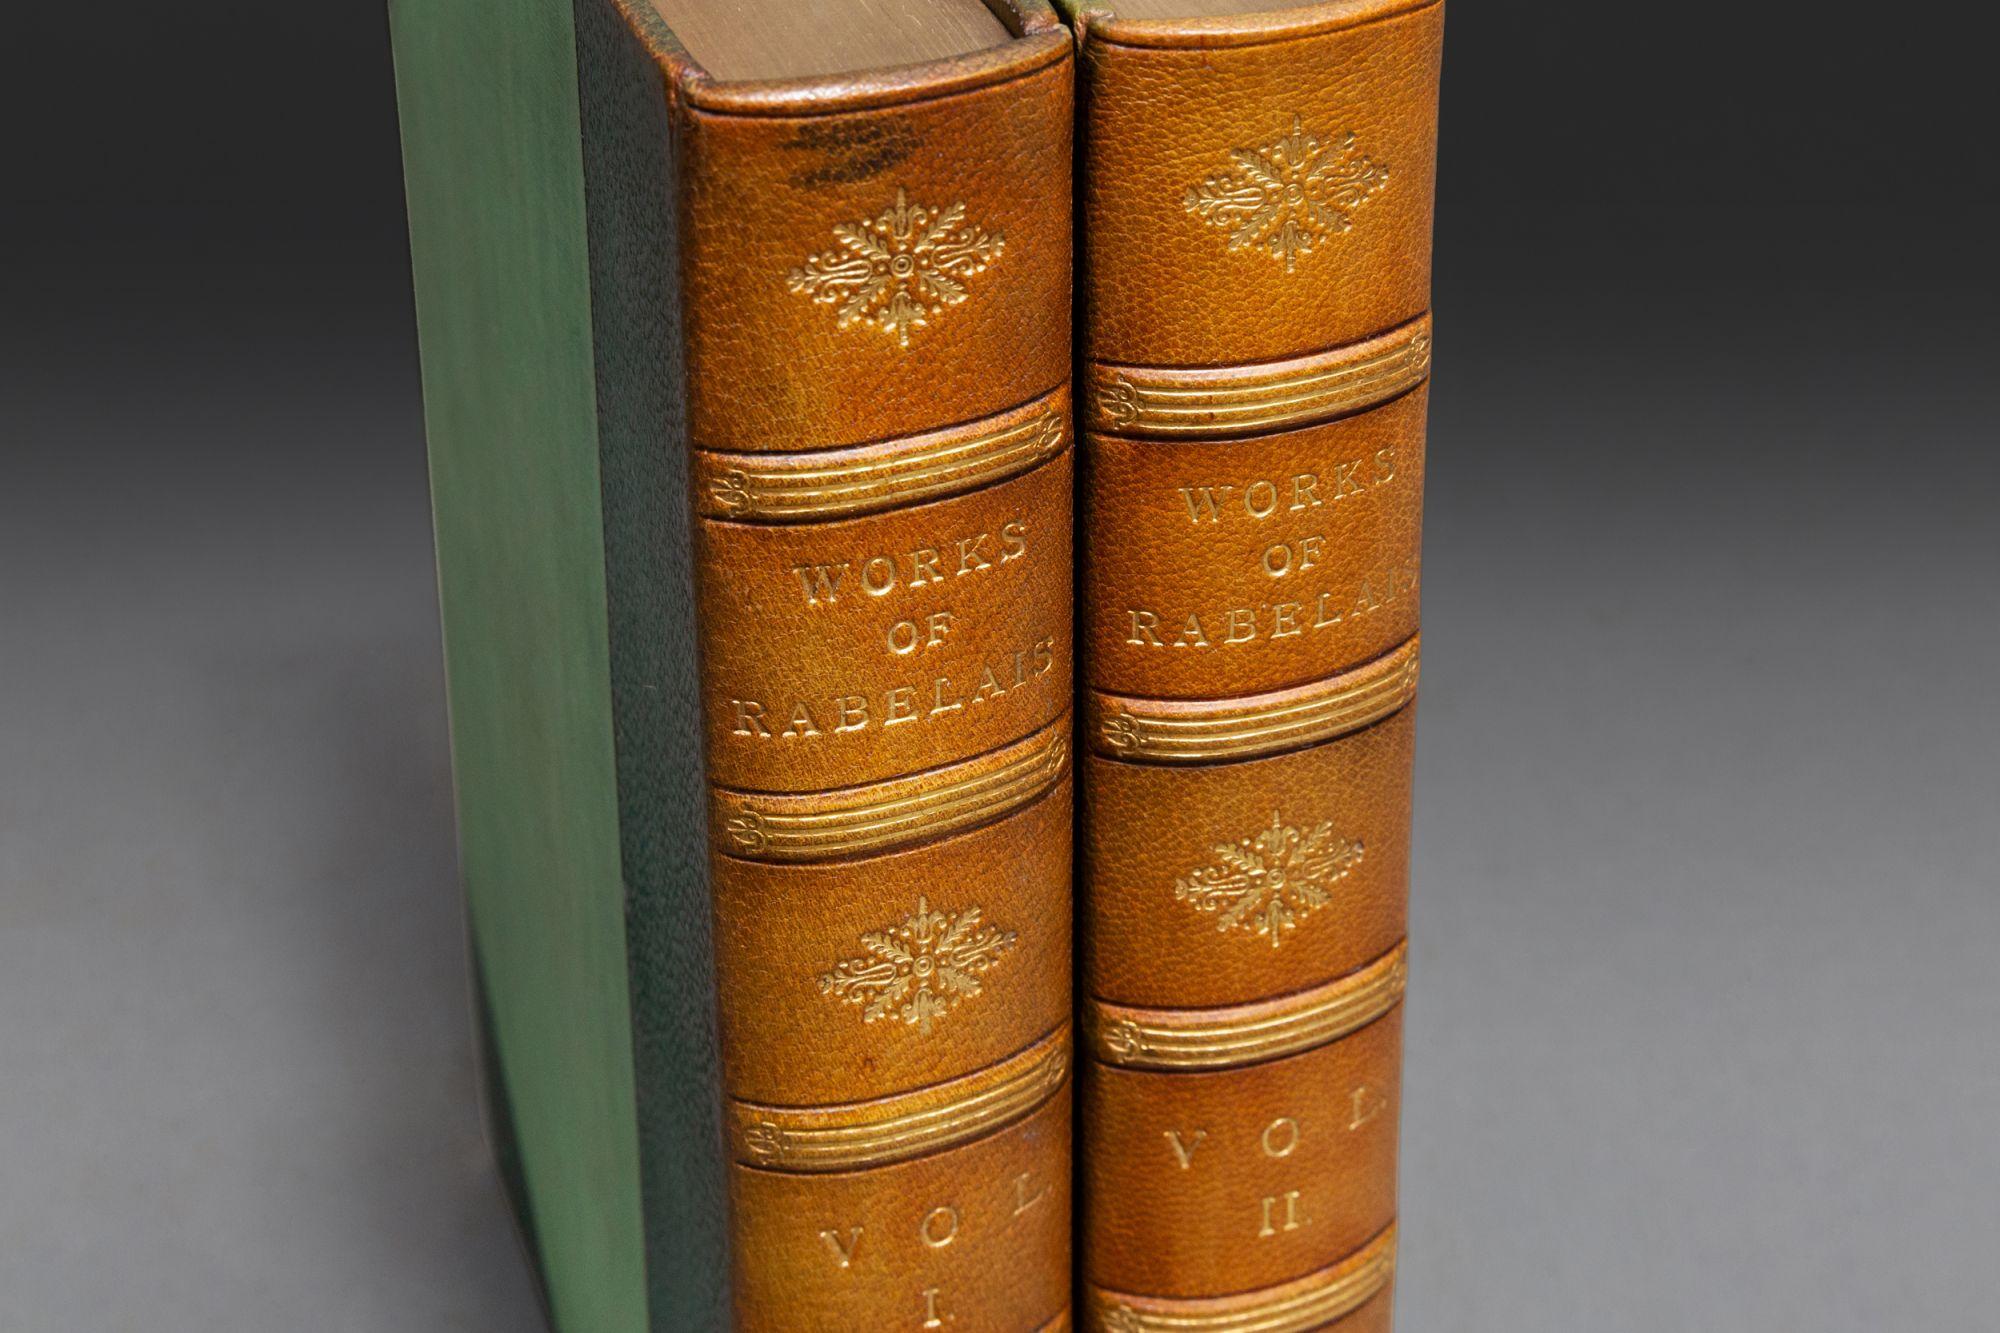 2 Volumes. Francois Rabelais. The Complete Works. Illustrated by W. Heath Robinson. Frontispiece of Gargantua. Bound in 3/4 green morocco by Kelly. Linen boards, marbled endpapers, gilt on spines, raised bands, top edges gilt. 
Published: